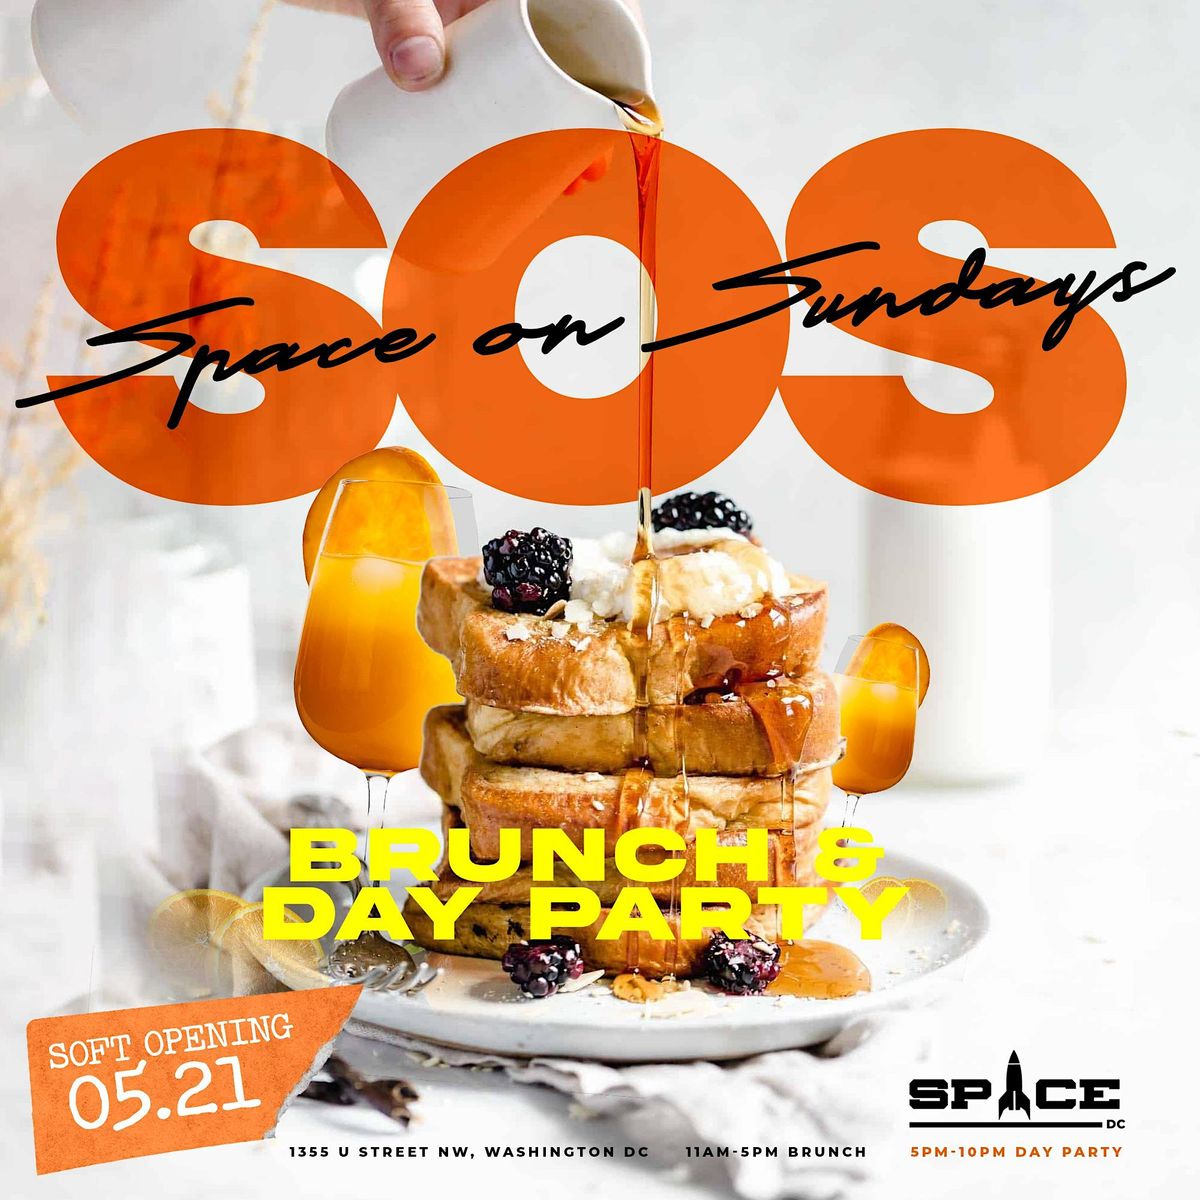 ThoseGuyz: Space on Sunday Brunch and Day Party